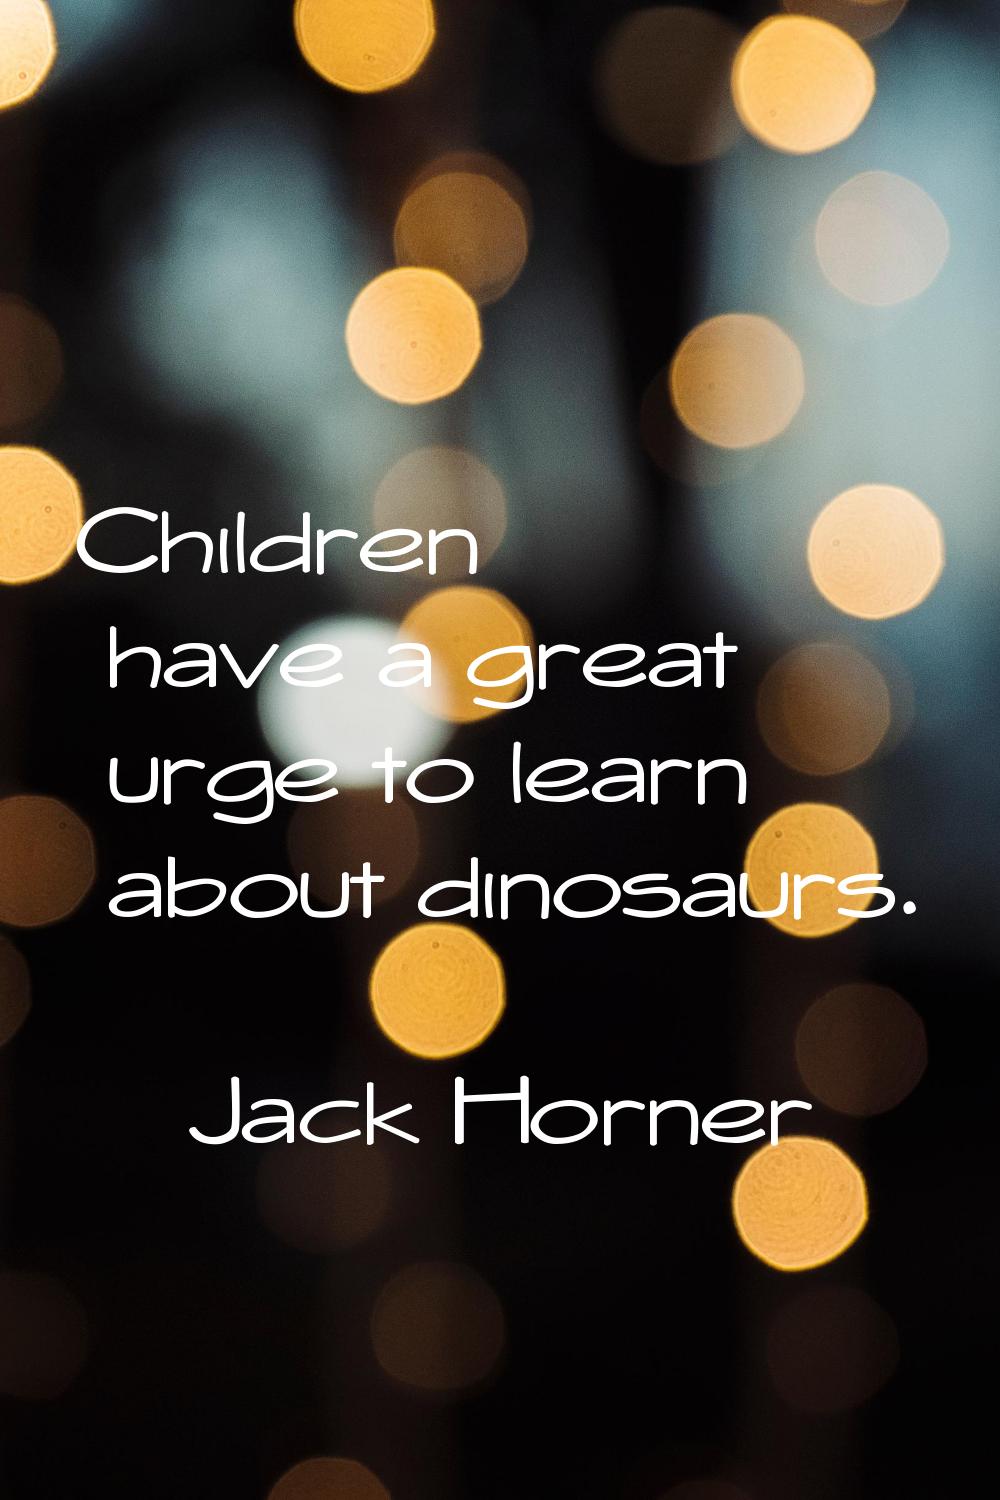 Children have a great urge to learn about dinosaurs.